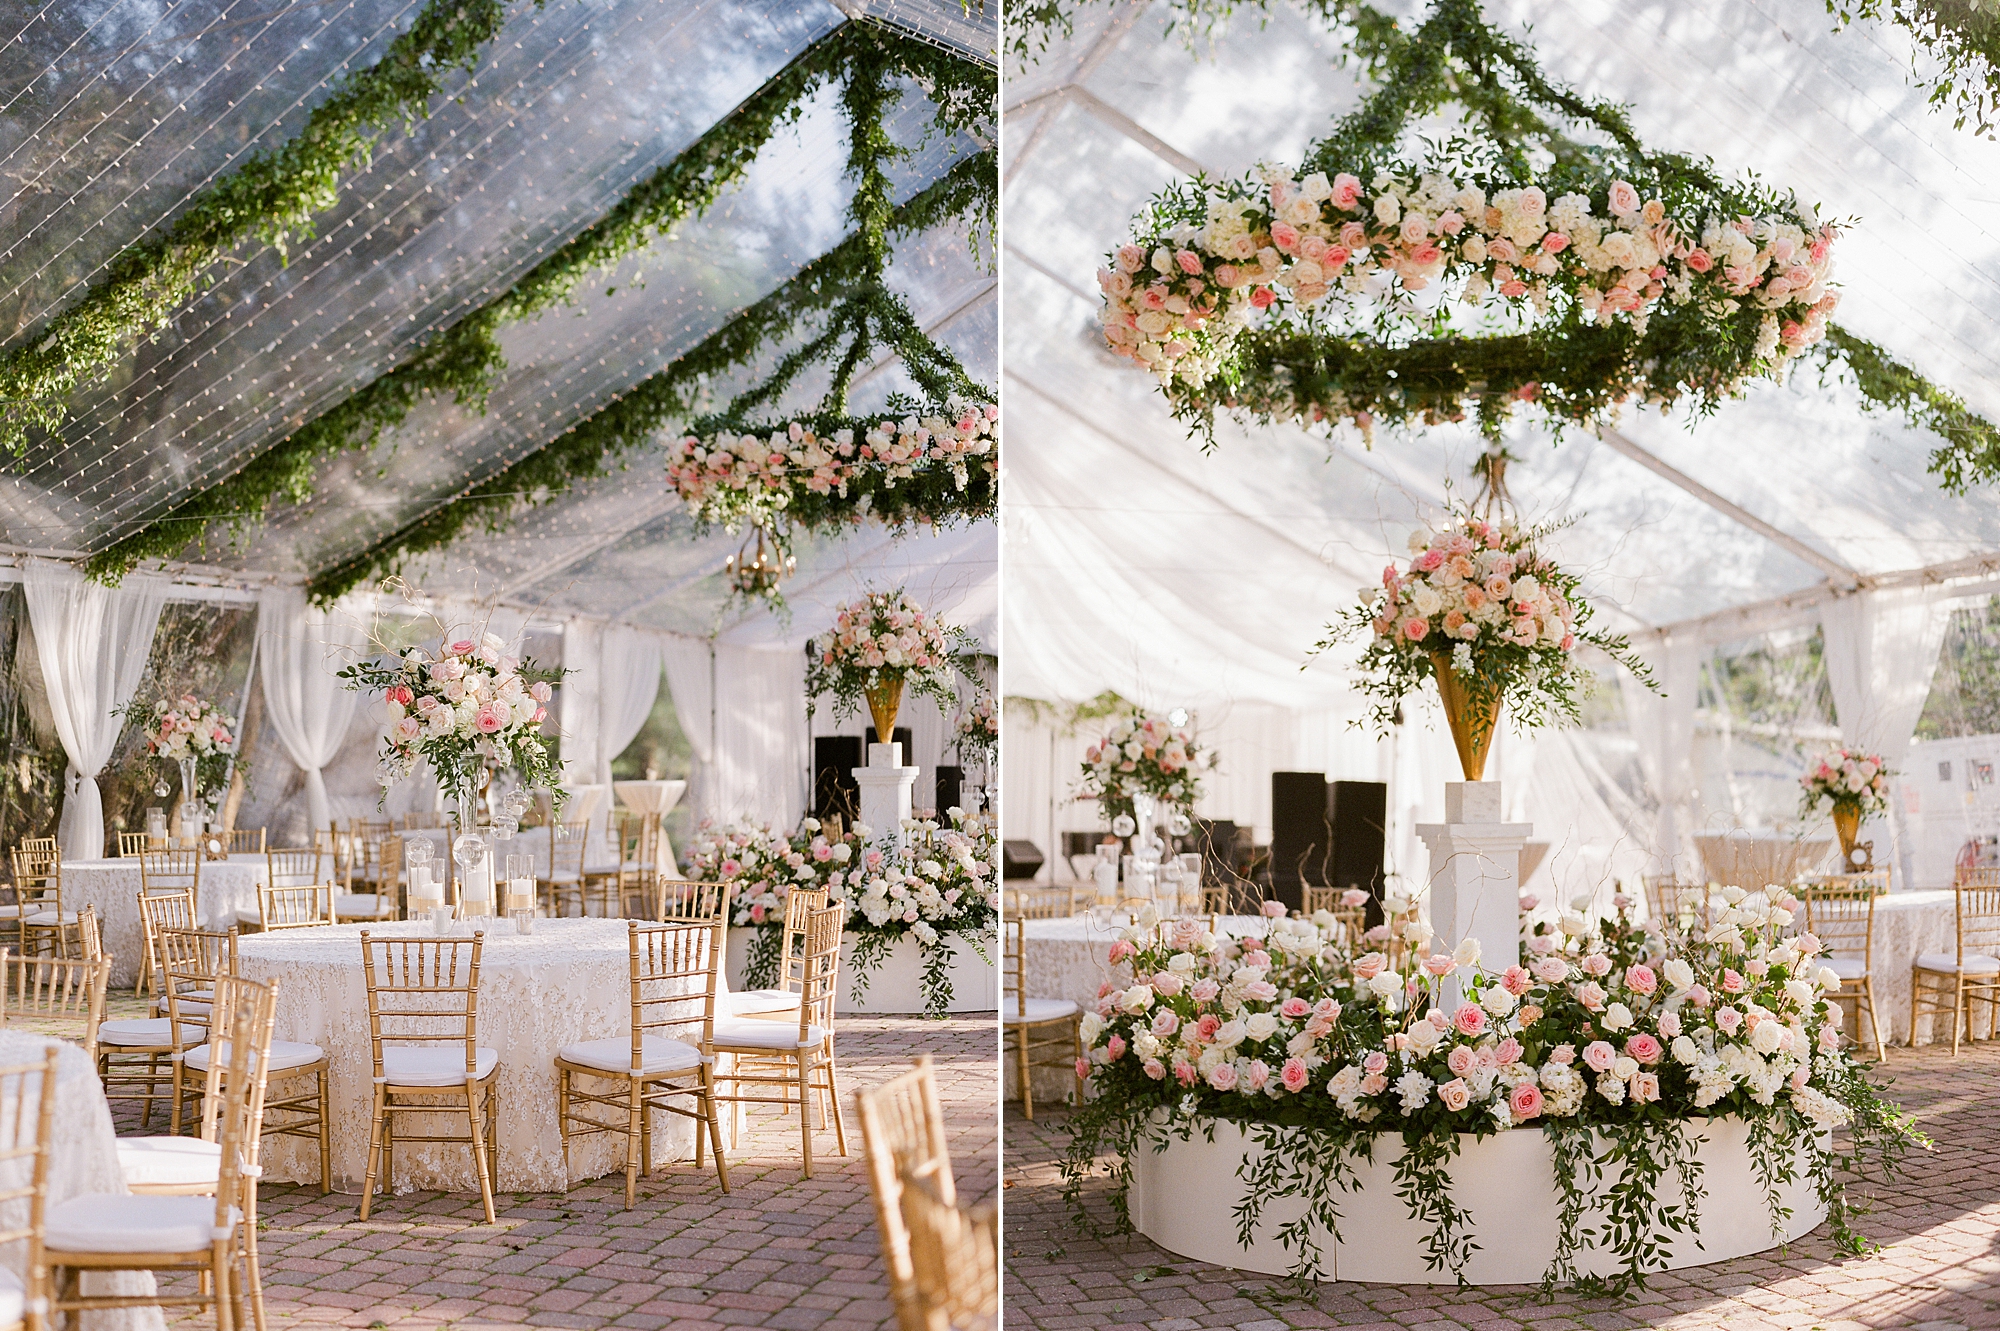 hanging floral installation with white and pink roses from tent ceiling 